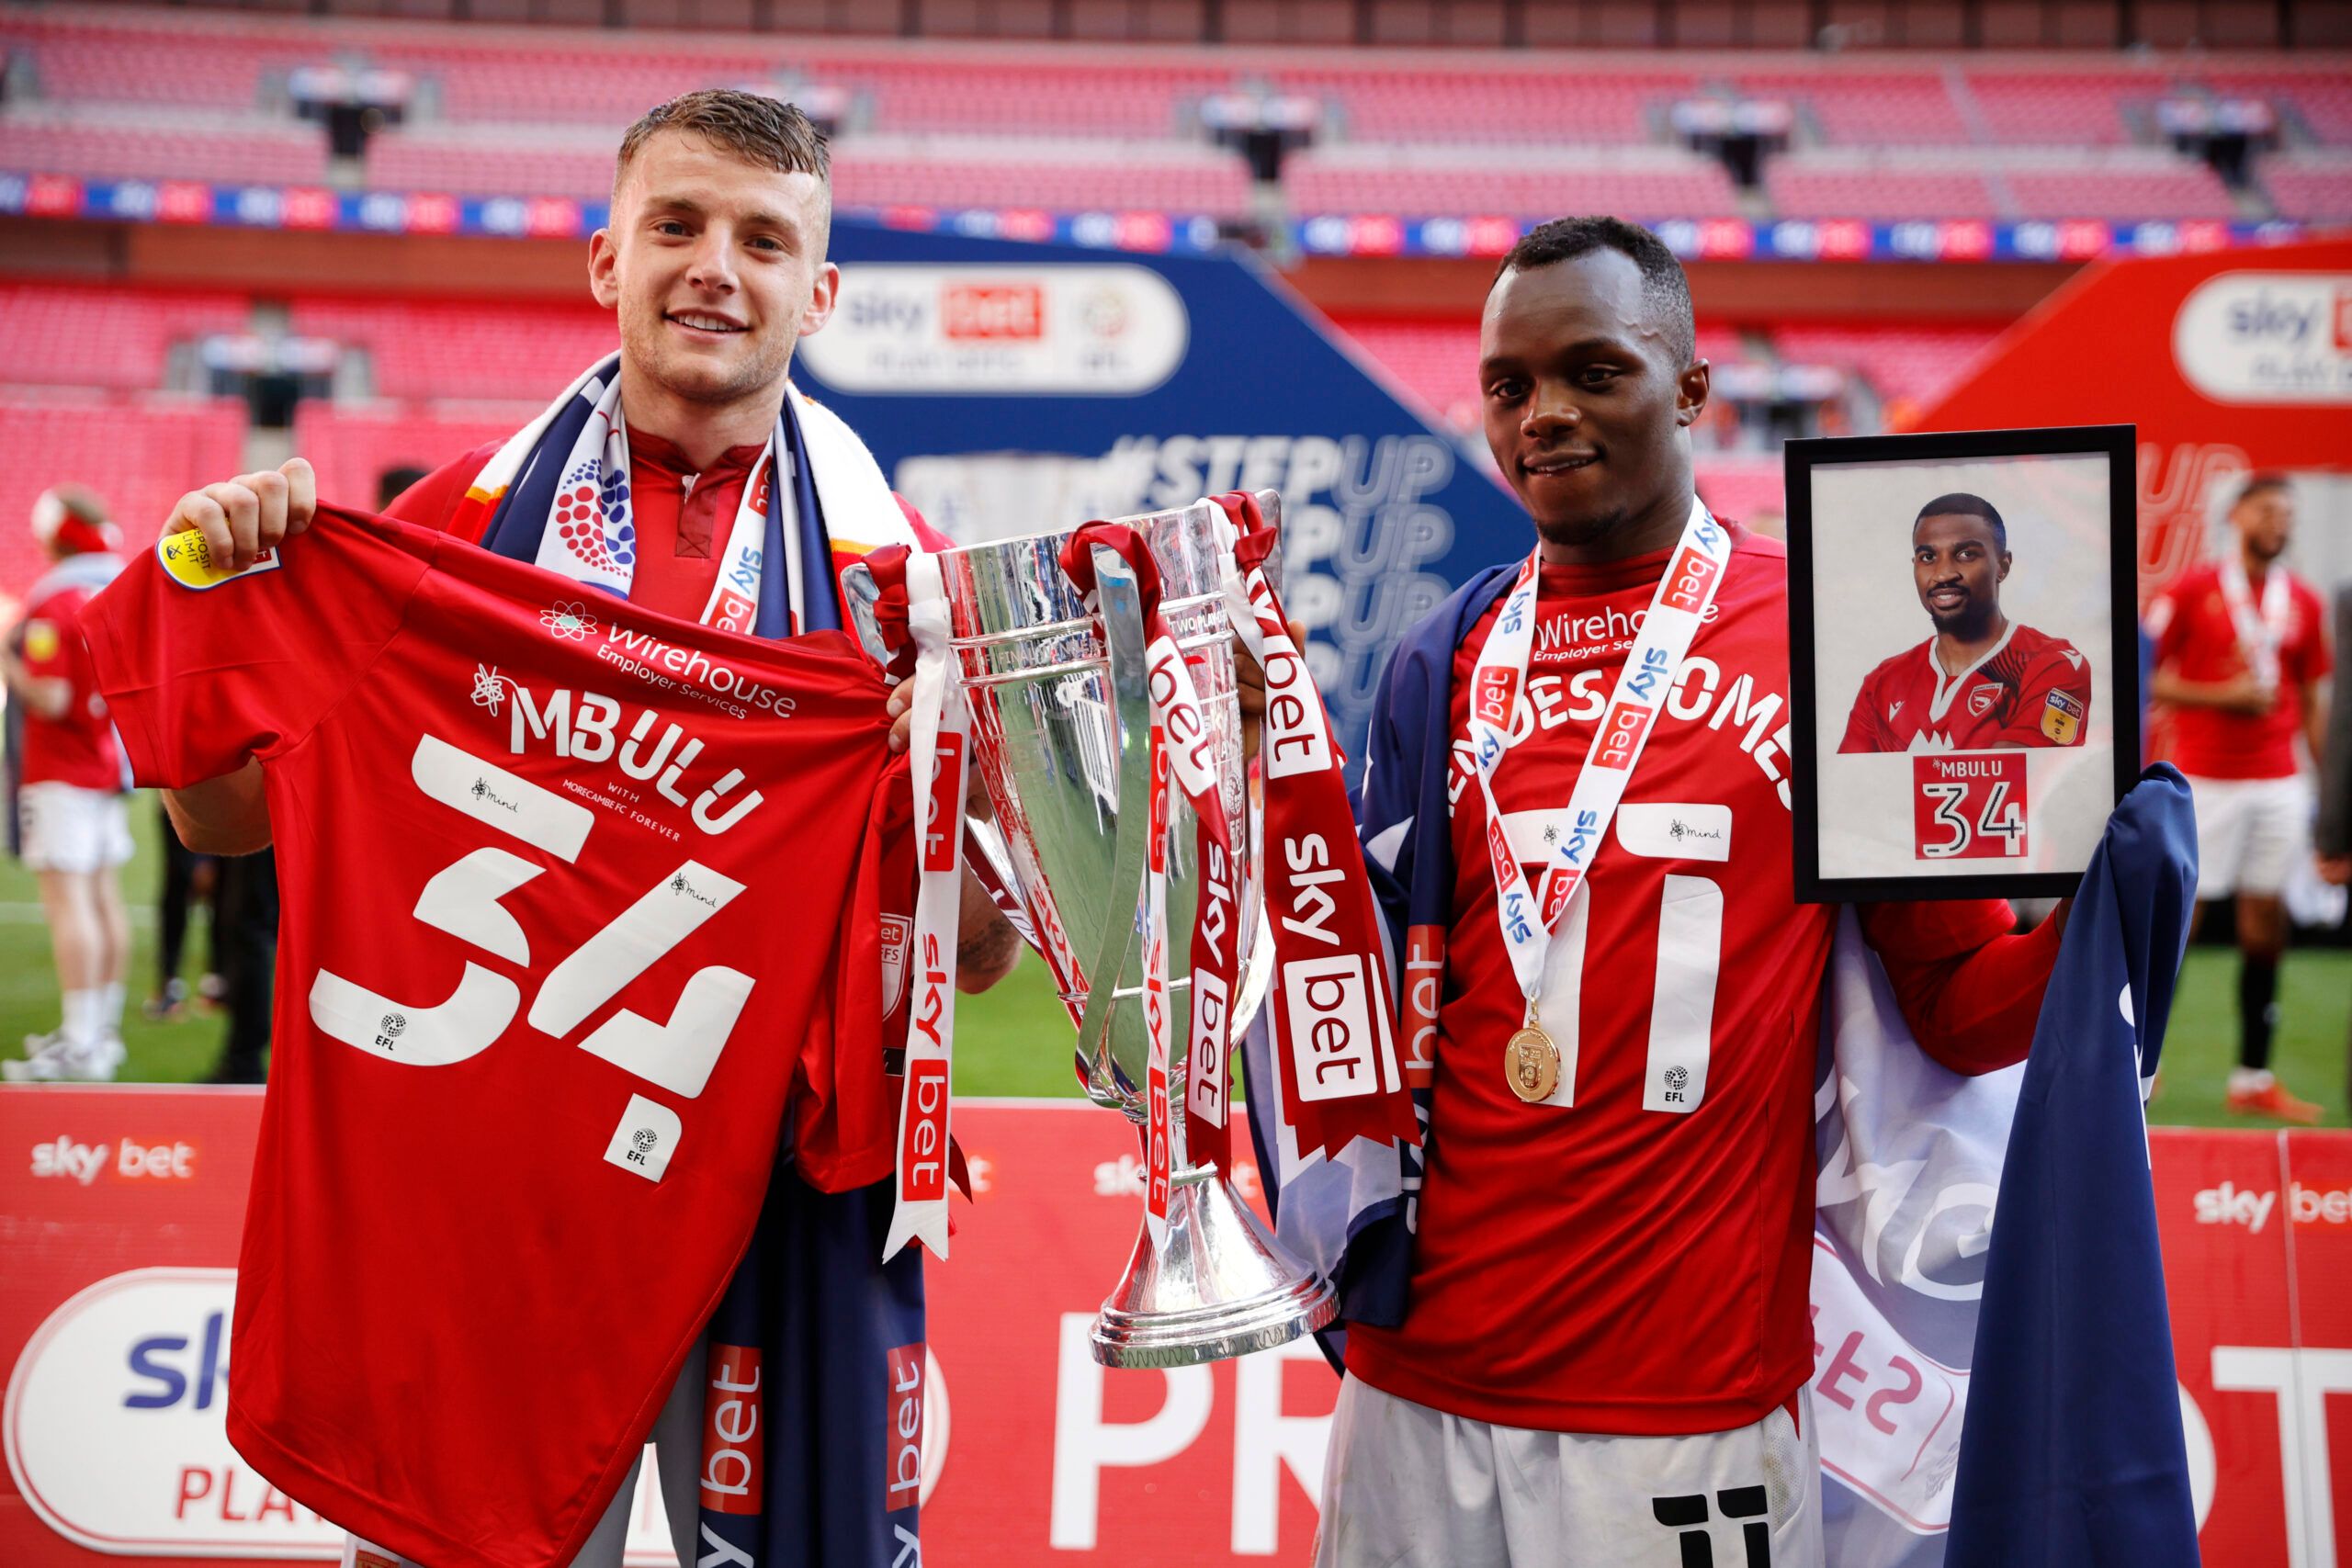 Soccer Football - League Two Play-Off Final - Morecambe v Newport County - Wembley Stadium, London, Britain - May 31, 2021 Morecambe's Carlos Mendes Gomes and Sam Lavelle pay tribute to former player Christian Mbulu's by holding up his shirt and photograph alongside the League Two Play-Off Final trophy Action Images/John Sibley EDITORIAL USE ONLY. No use with unauthorized audio, video, data, fixture lists, club/league logos or 'live' services. Online in-match use limited to 75 images, no video e